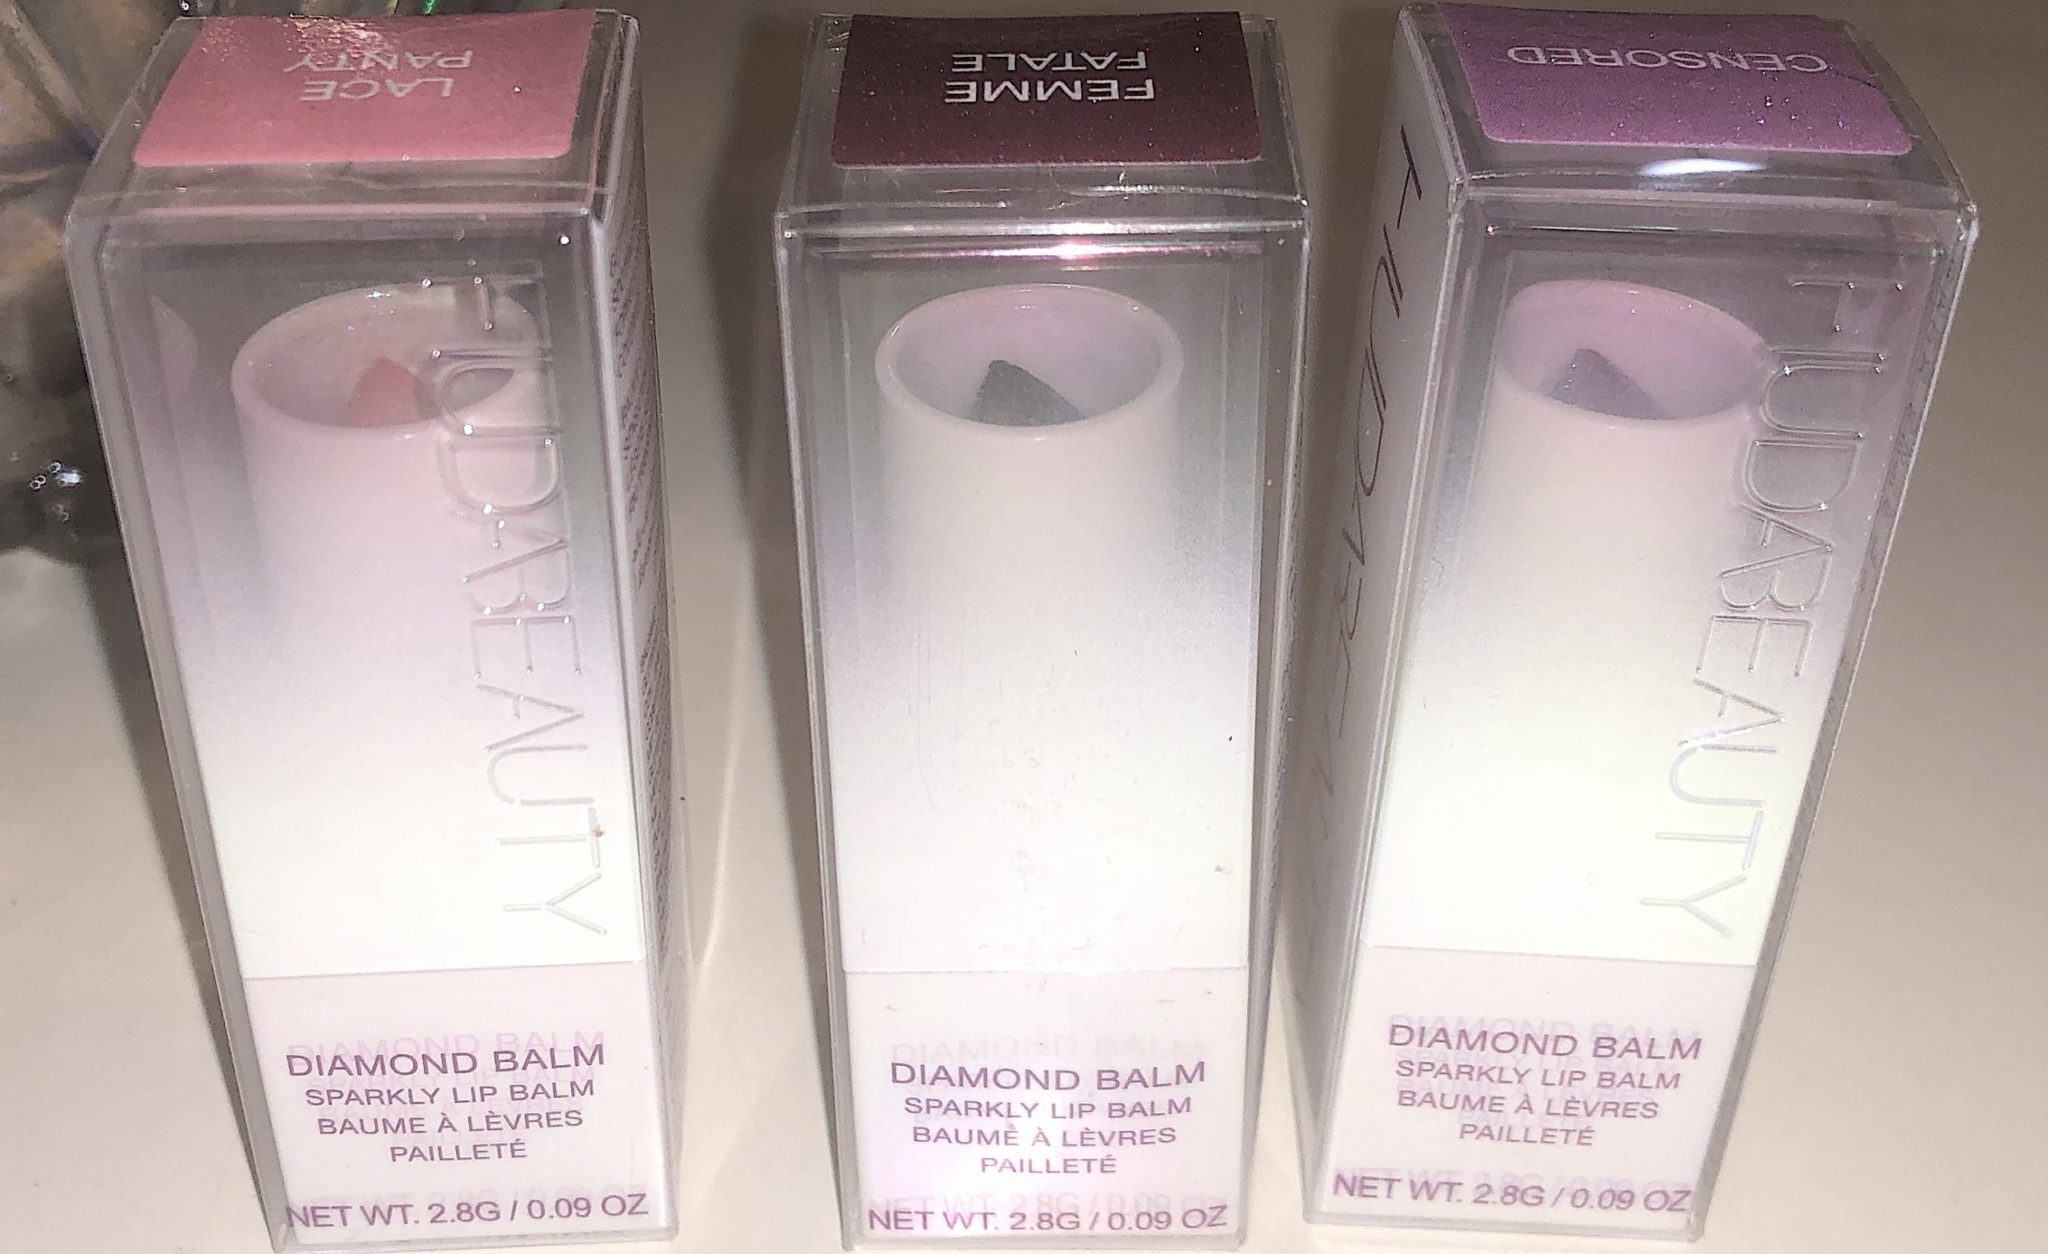 OUTER PACKAGING FOR HUDA DIAMOND HYDRATING LIP BALM